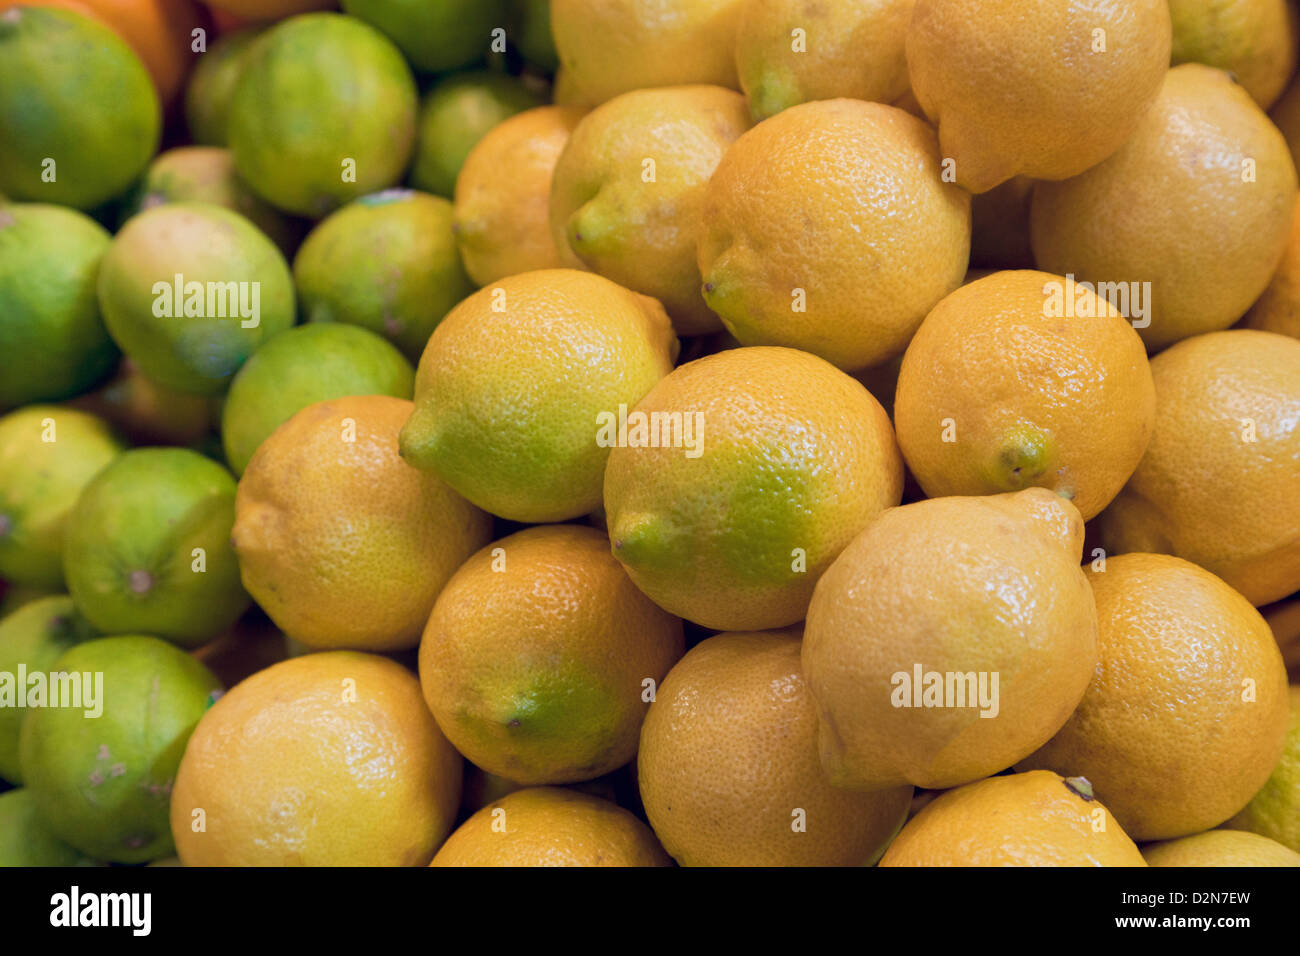 lemons and limes, Rutaceae, citrus fruit on ready for sale at the farmer's market Stock Photo